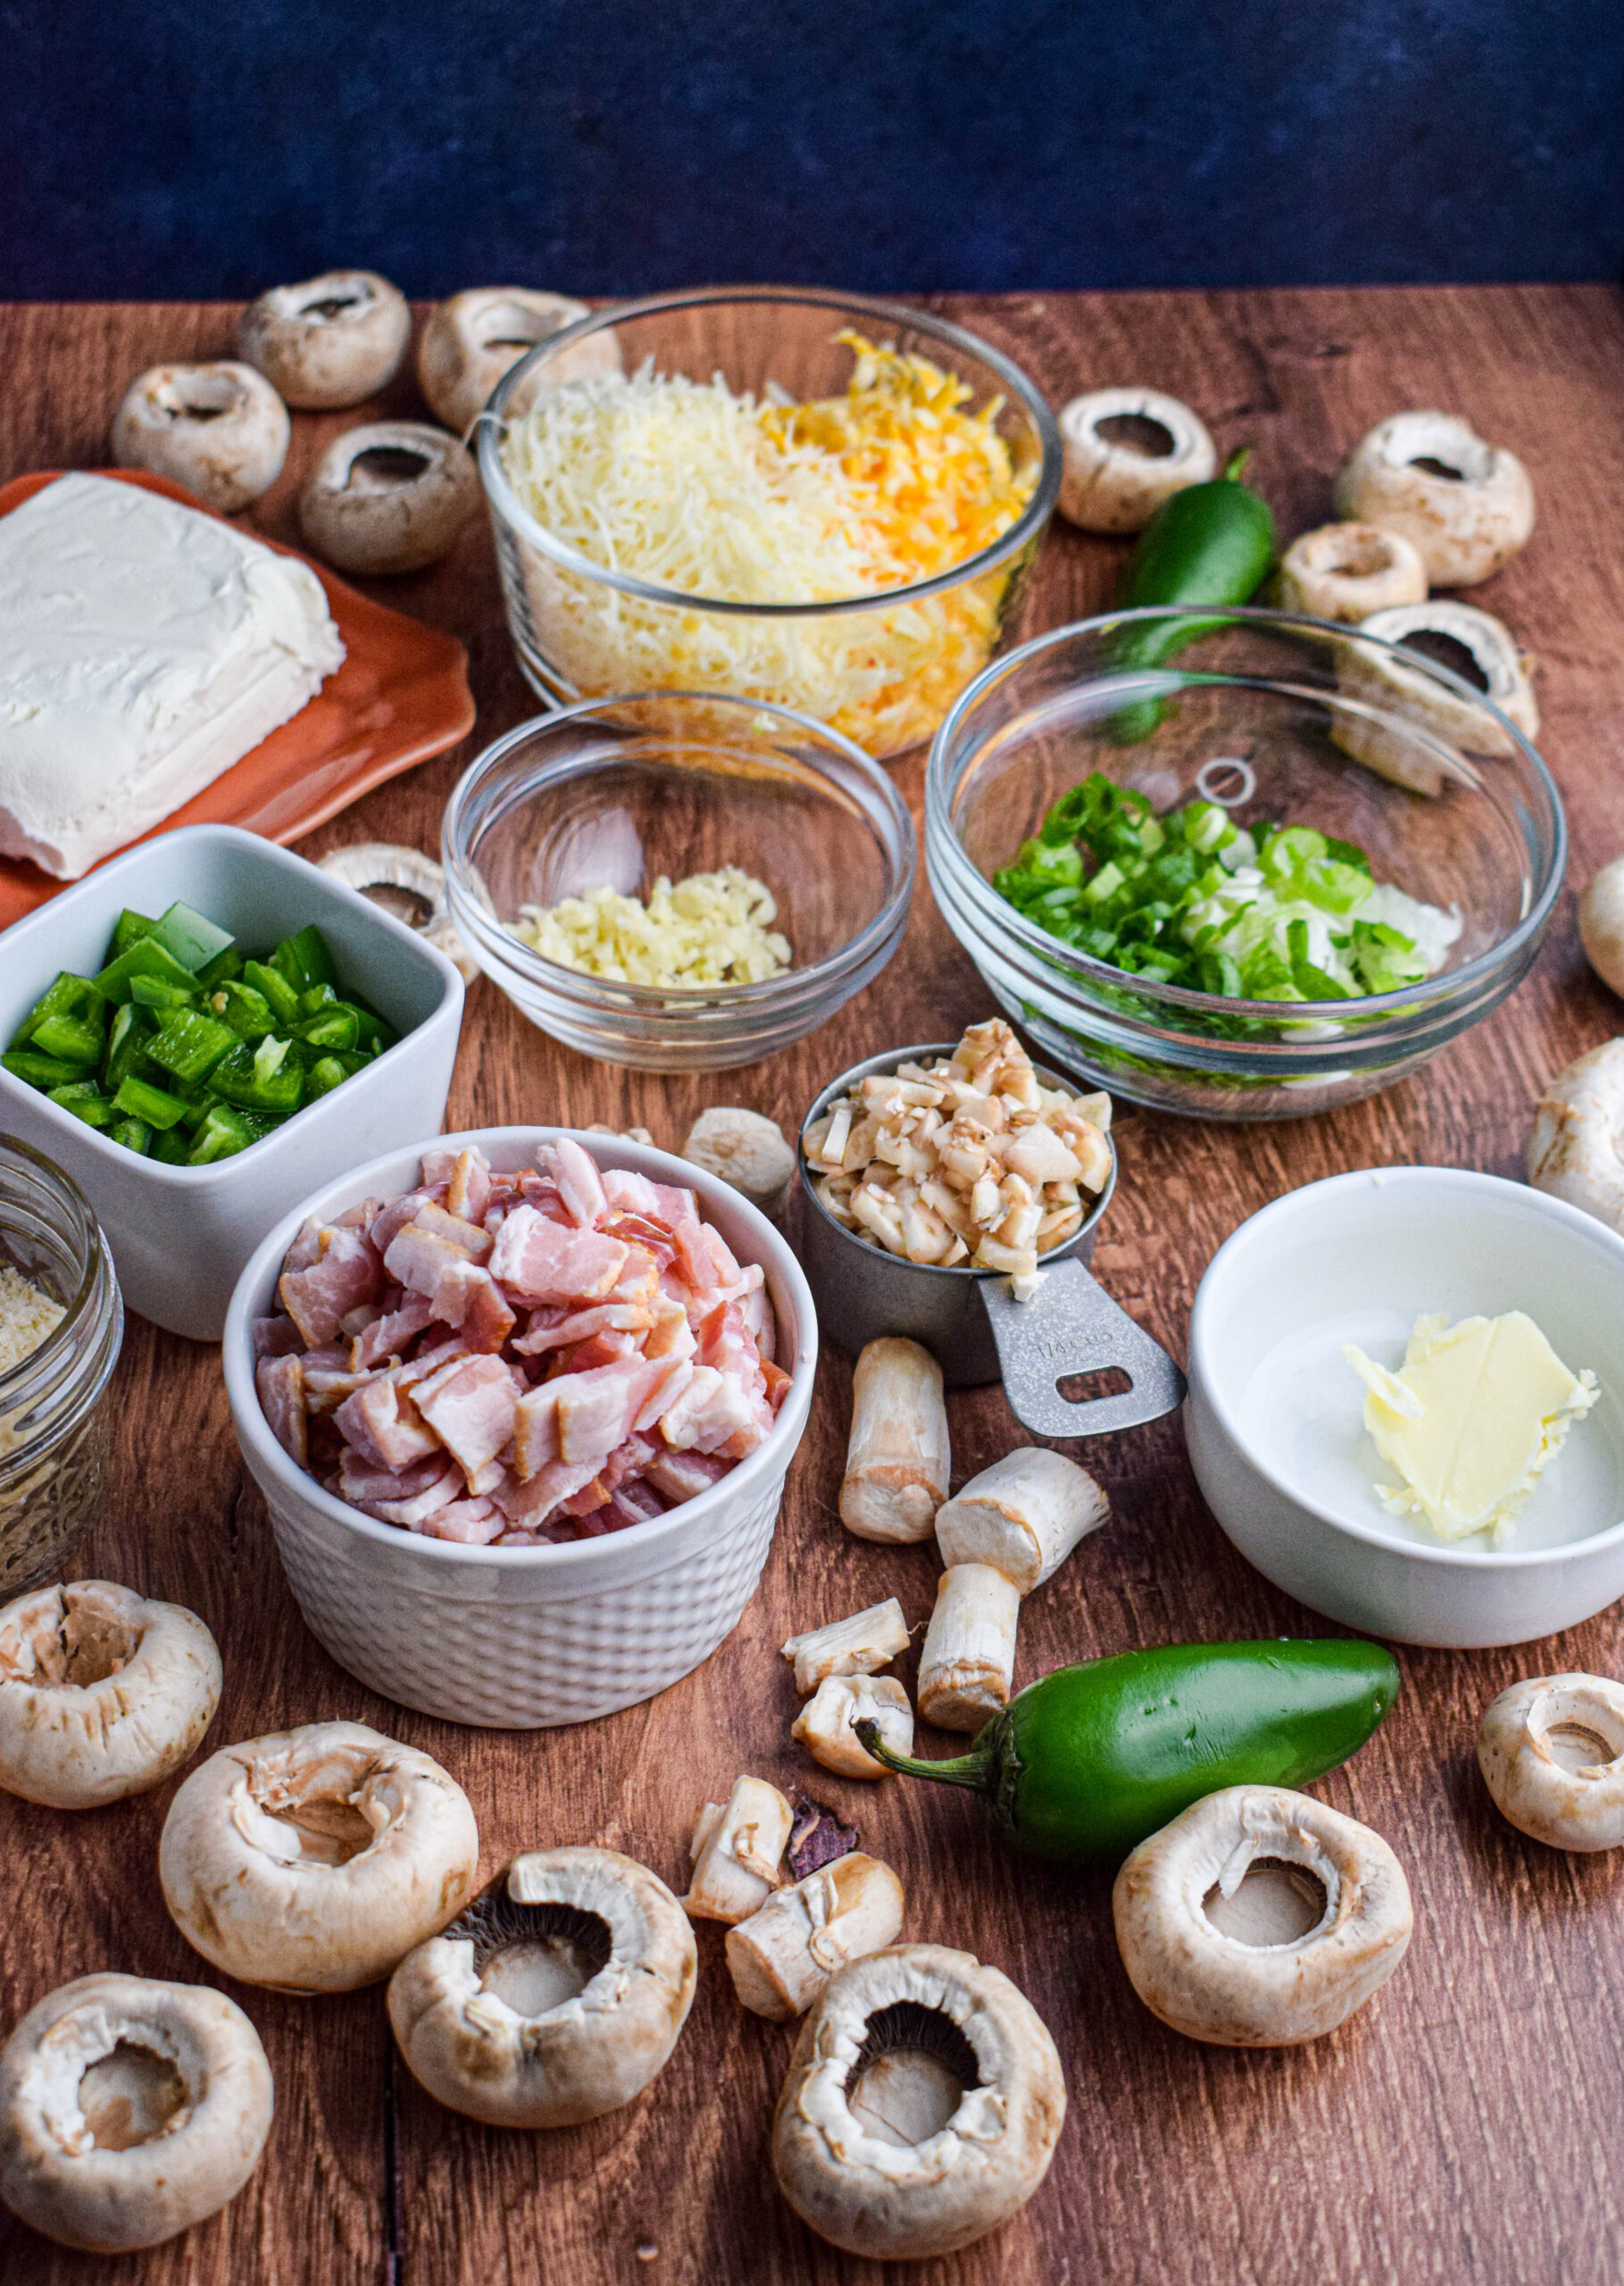 ingredients laid out for popper stuffed mushrooms